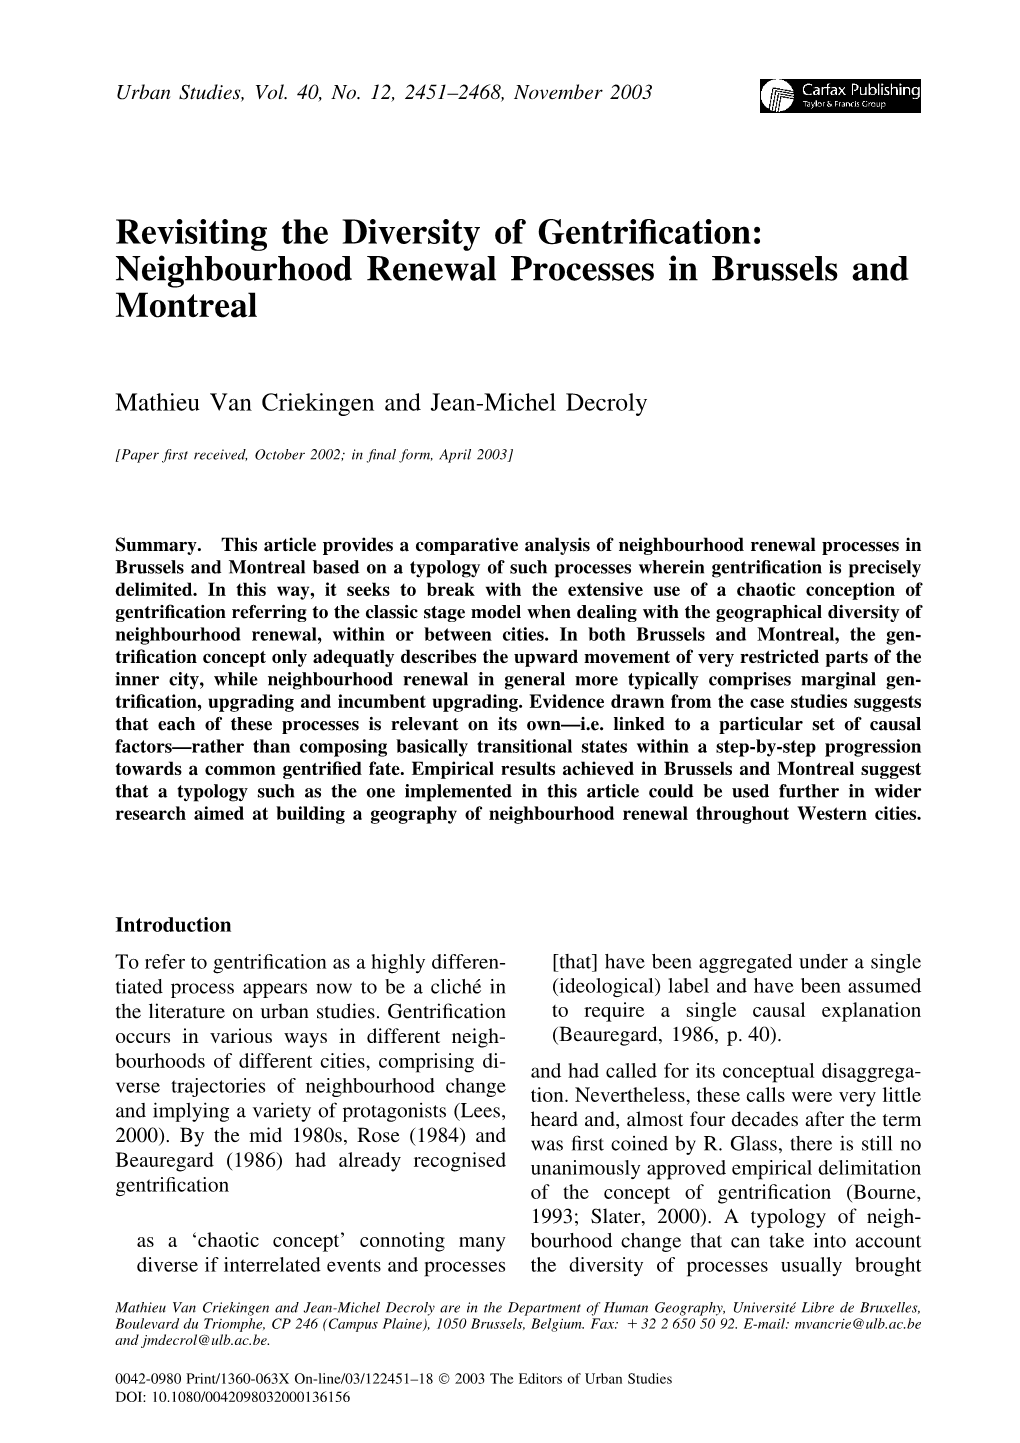 Neighbourhood Renewal Processes in Brussels and Montreal